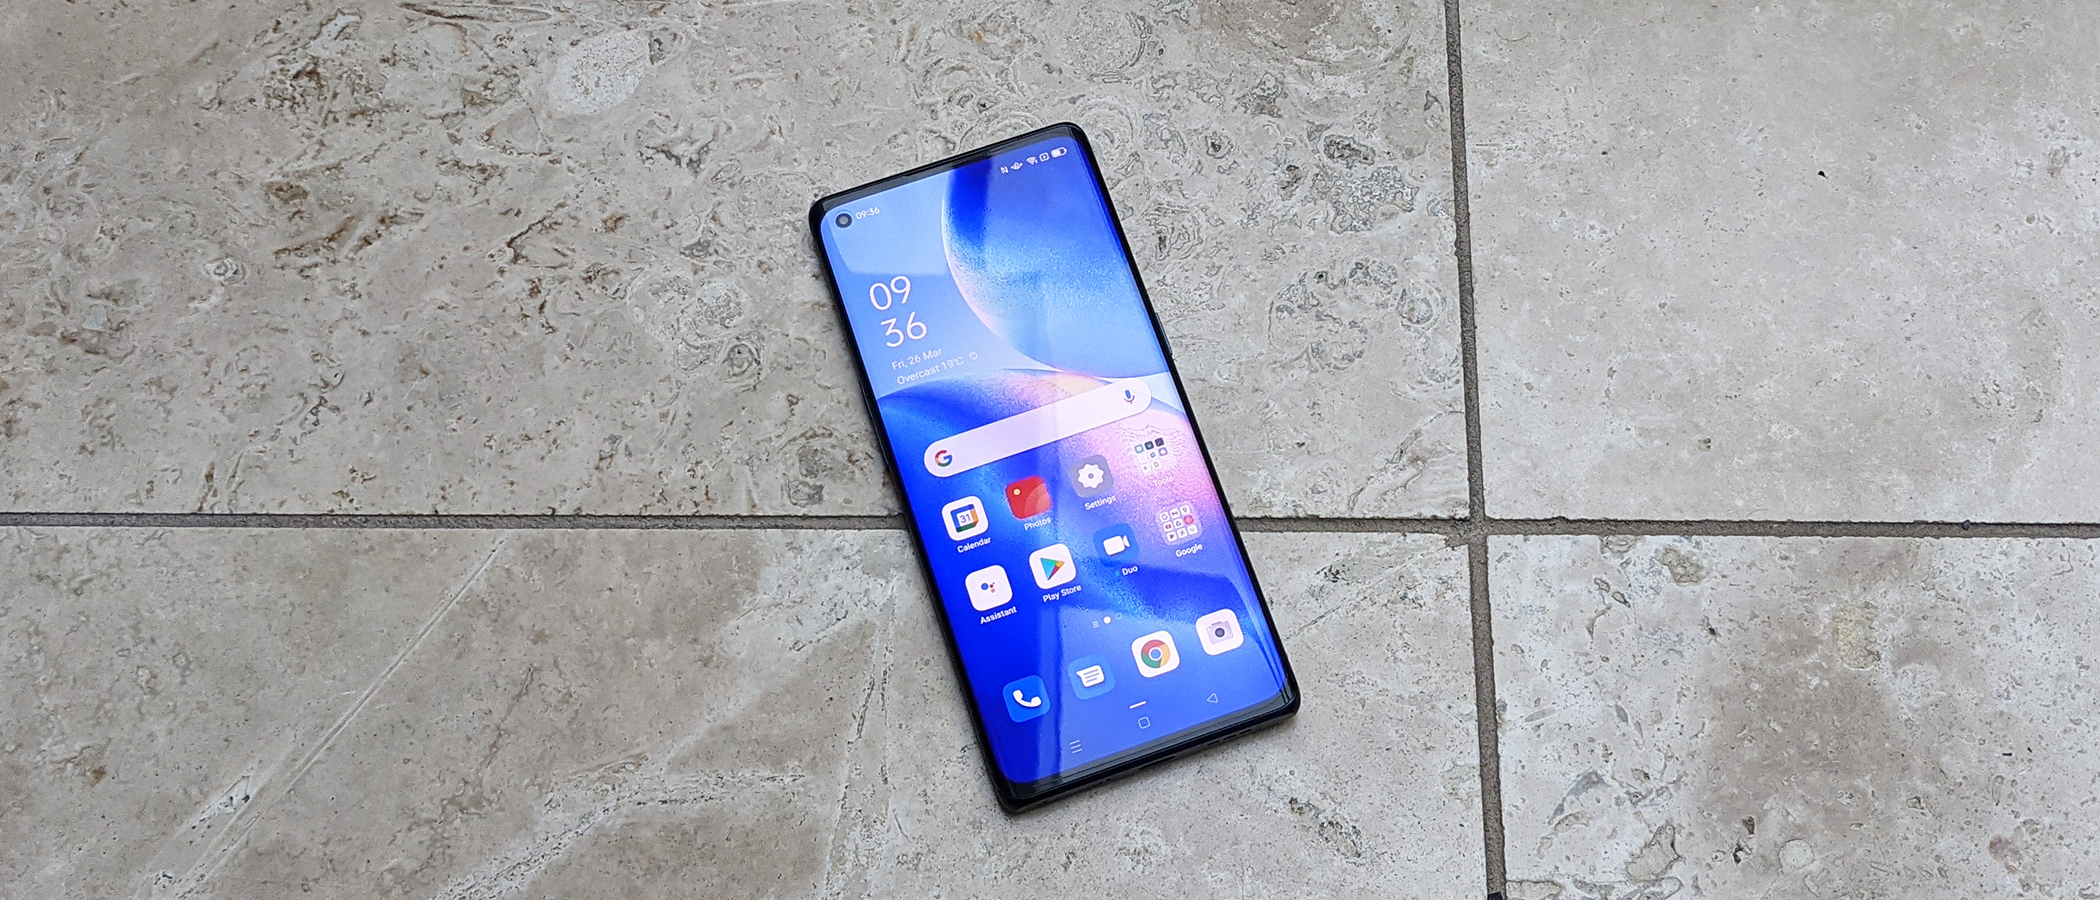 OPPO Find X3 Lite 5G Review: How good is this mid-ranger?